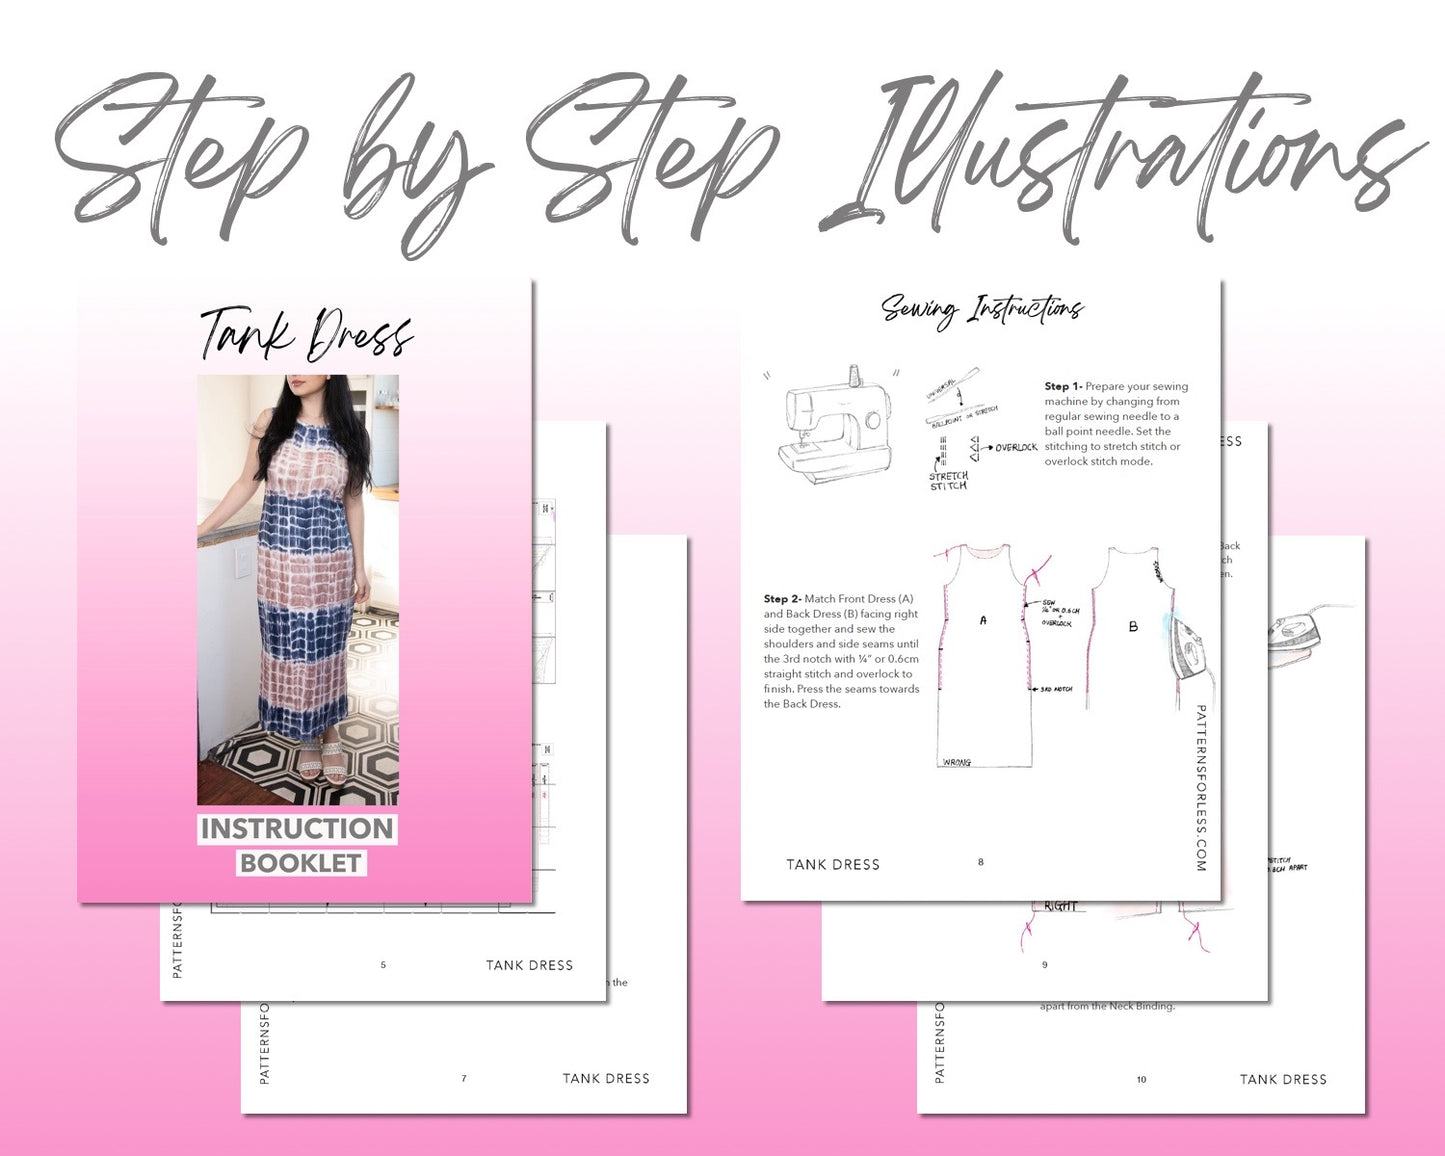 Tank Long Knit Dress sewing pattern step by step illustrations.